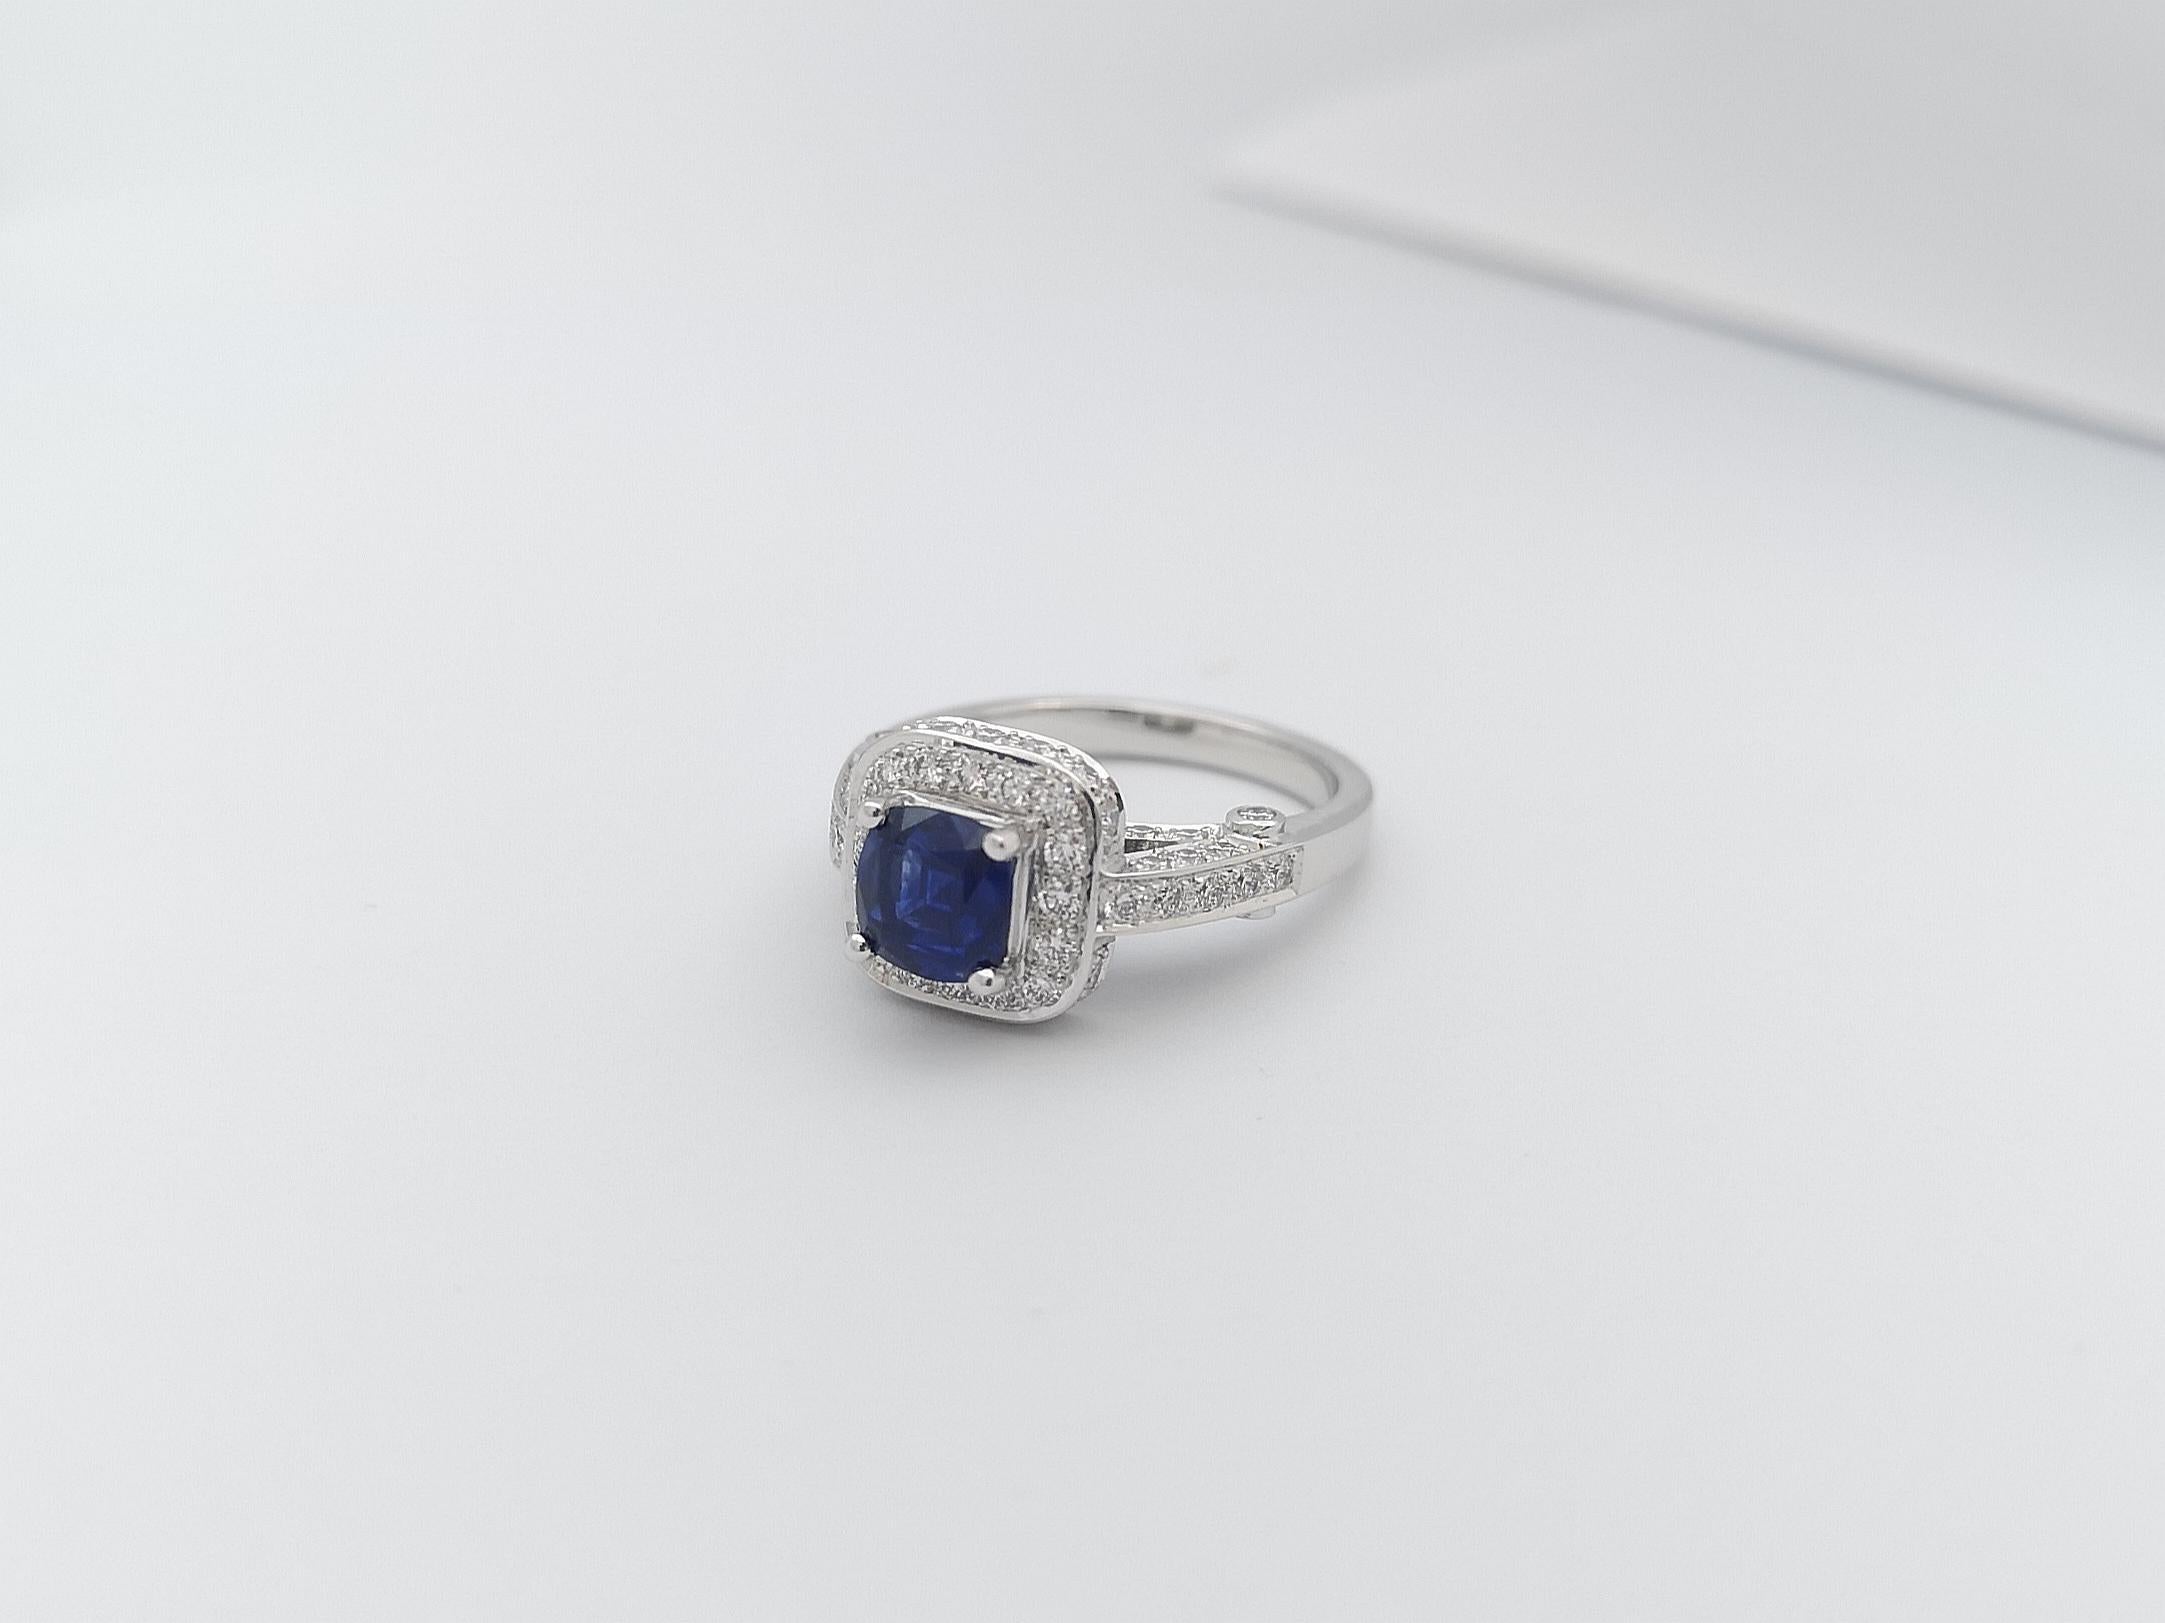 Certified Blue Sapphire with Diamond Ring Set in 18 Karat White Gold For Sale 5